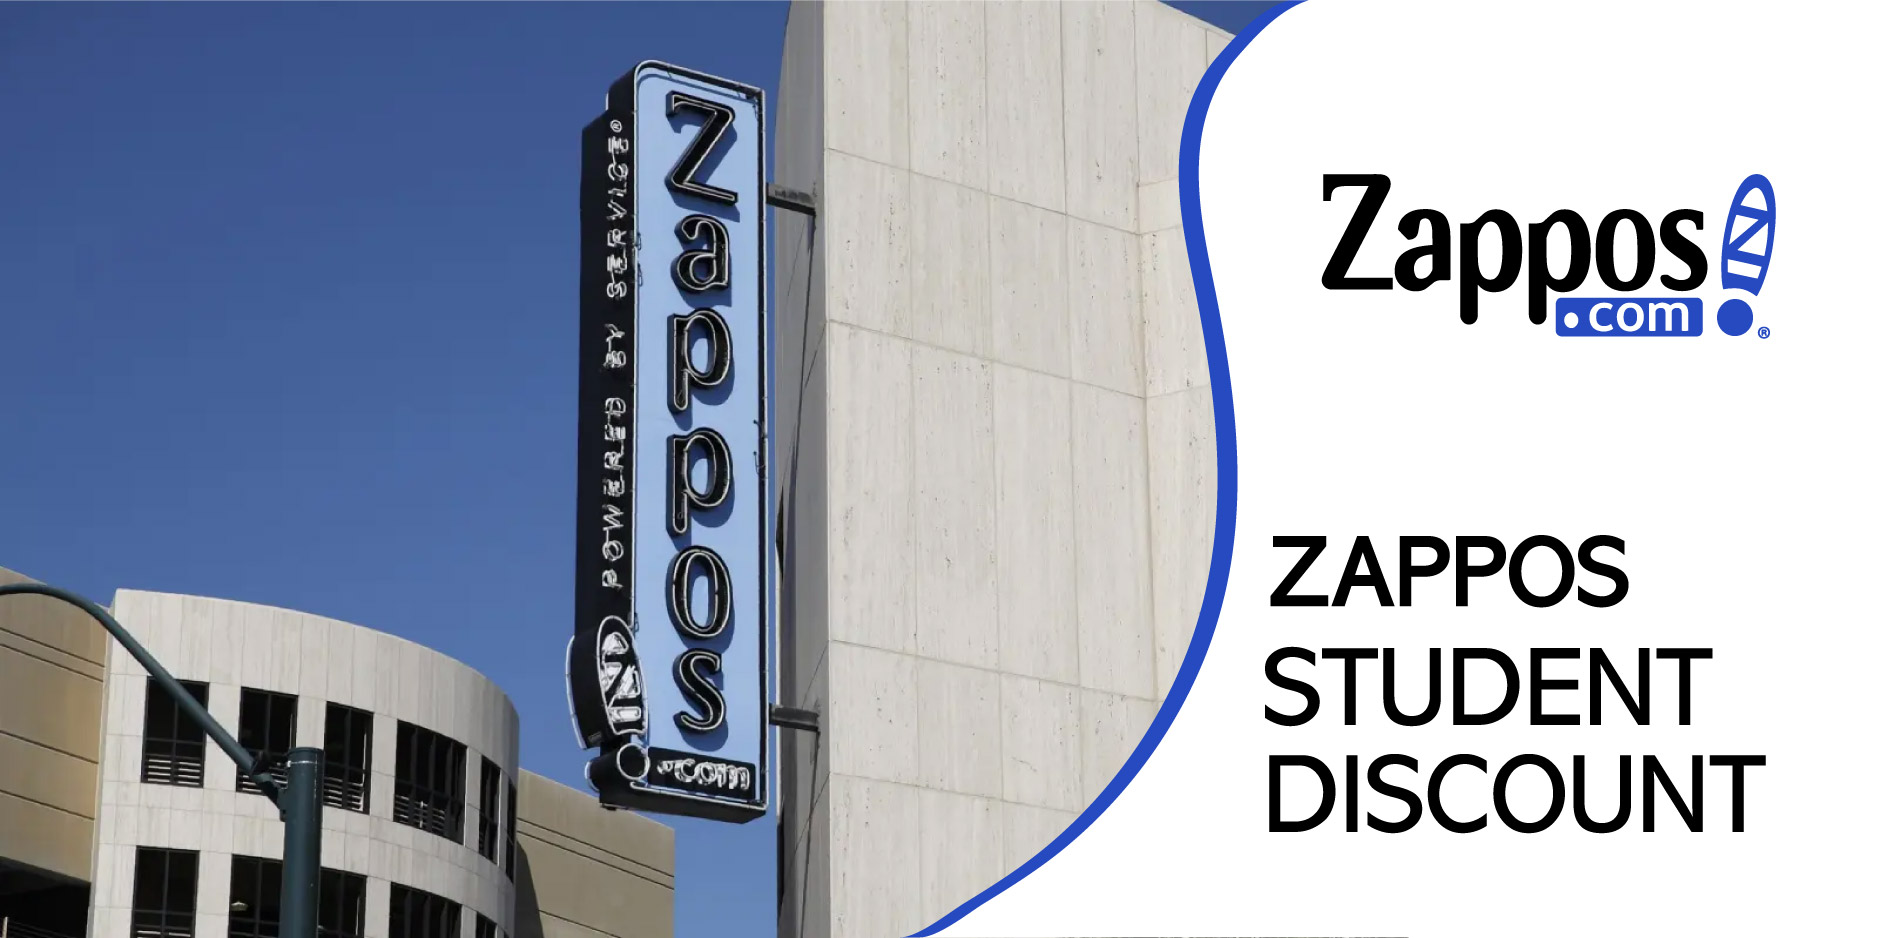 Zappos Student Discount